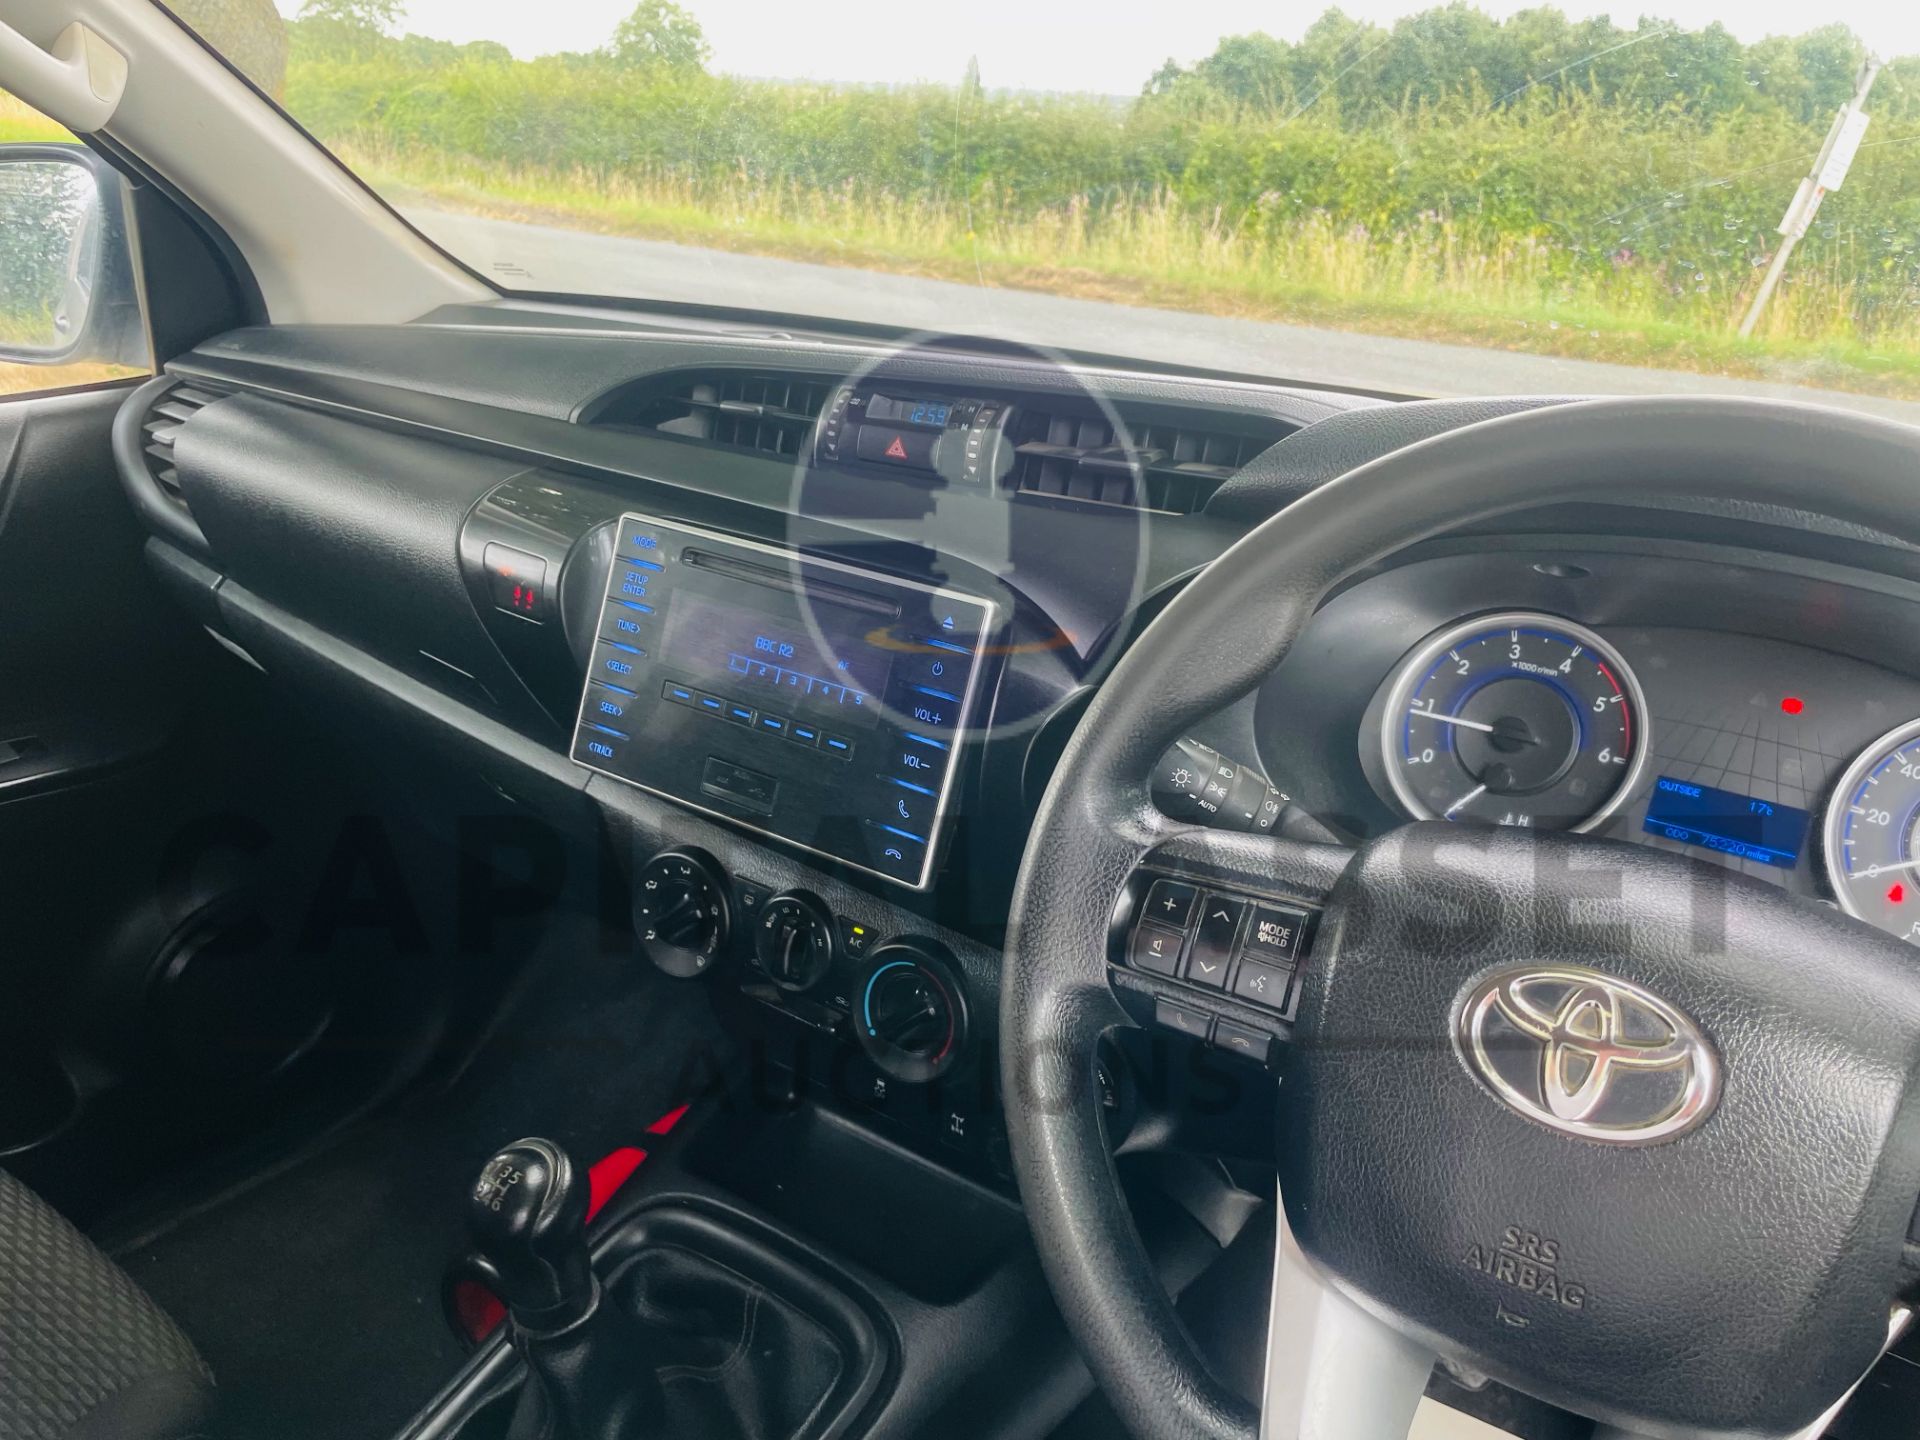 TOYOTA HILUX *DOUBLE CAB PICK-UP* (2018 - EURO 6) 2.4 D4-D - 6 SPEED (1 OWNER) *ULTRA LOW MILES* - Image 31 of 40